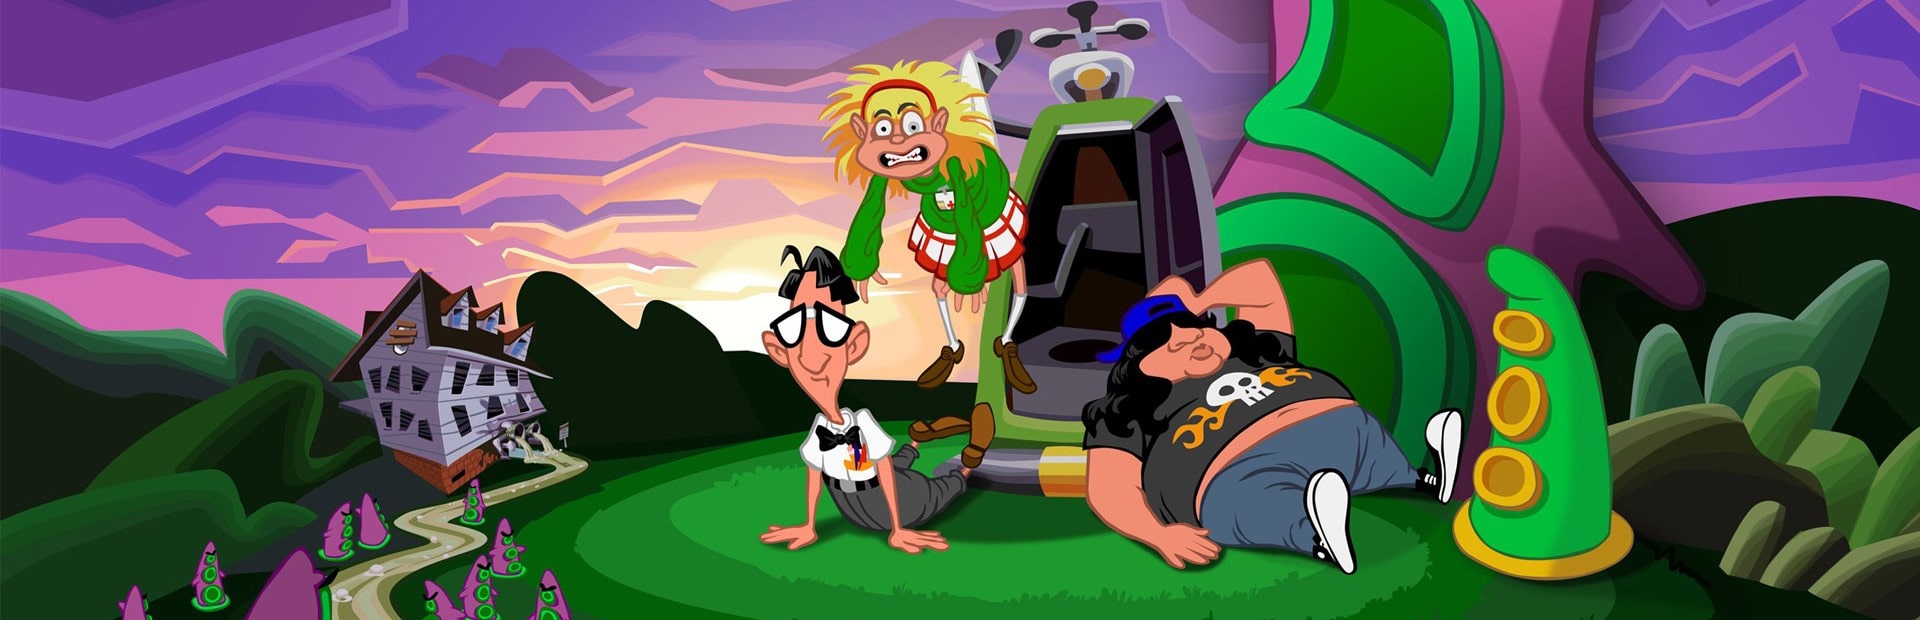 Throwback Thursday: Day of the Tentacle Remastered